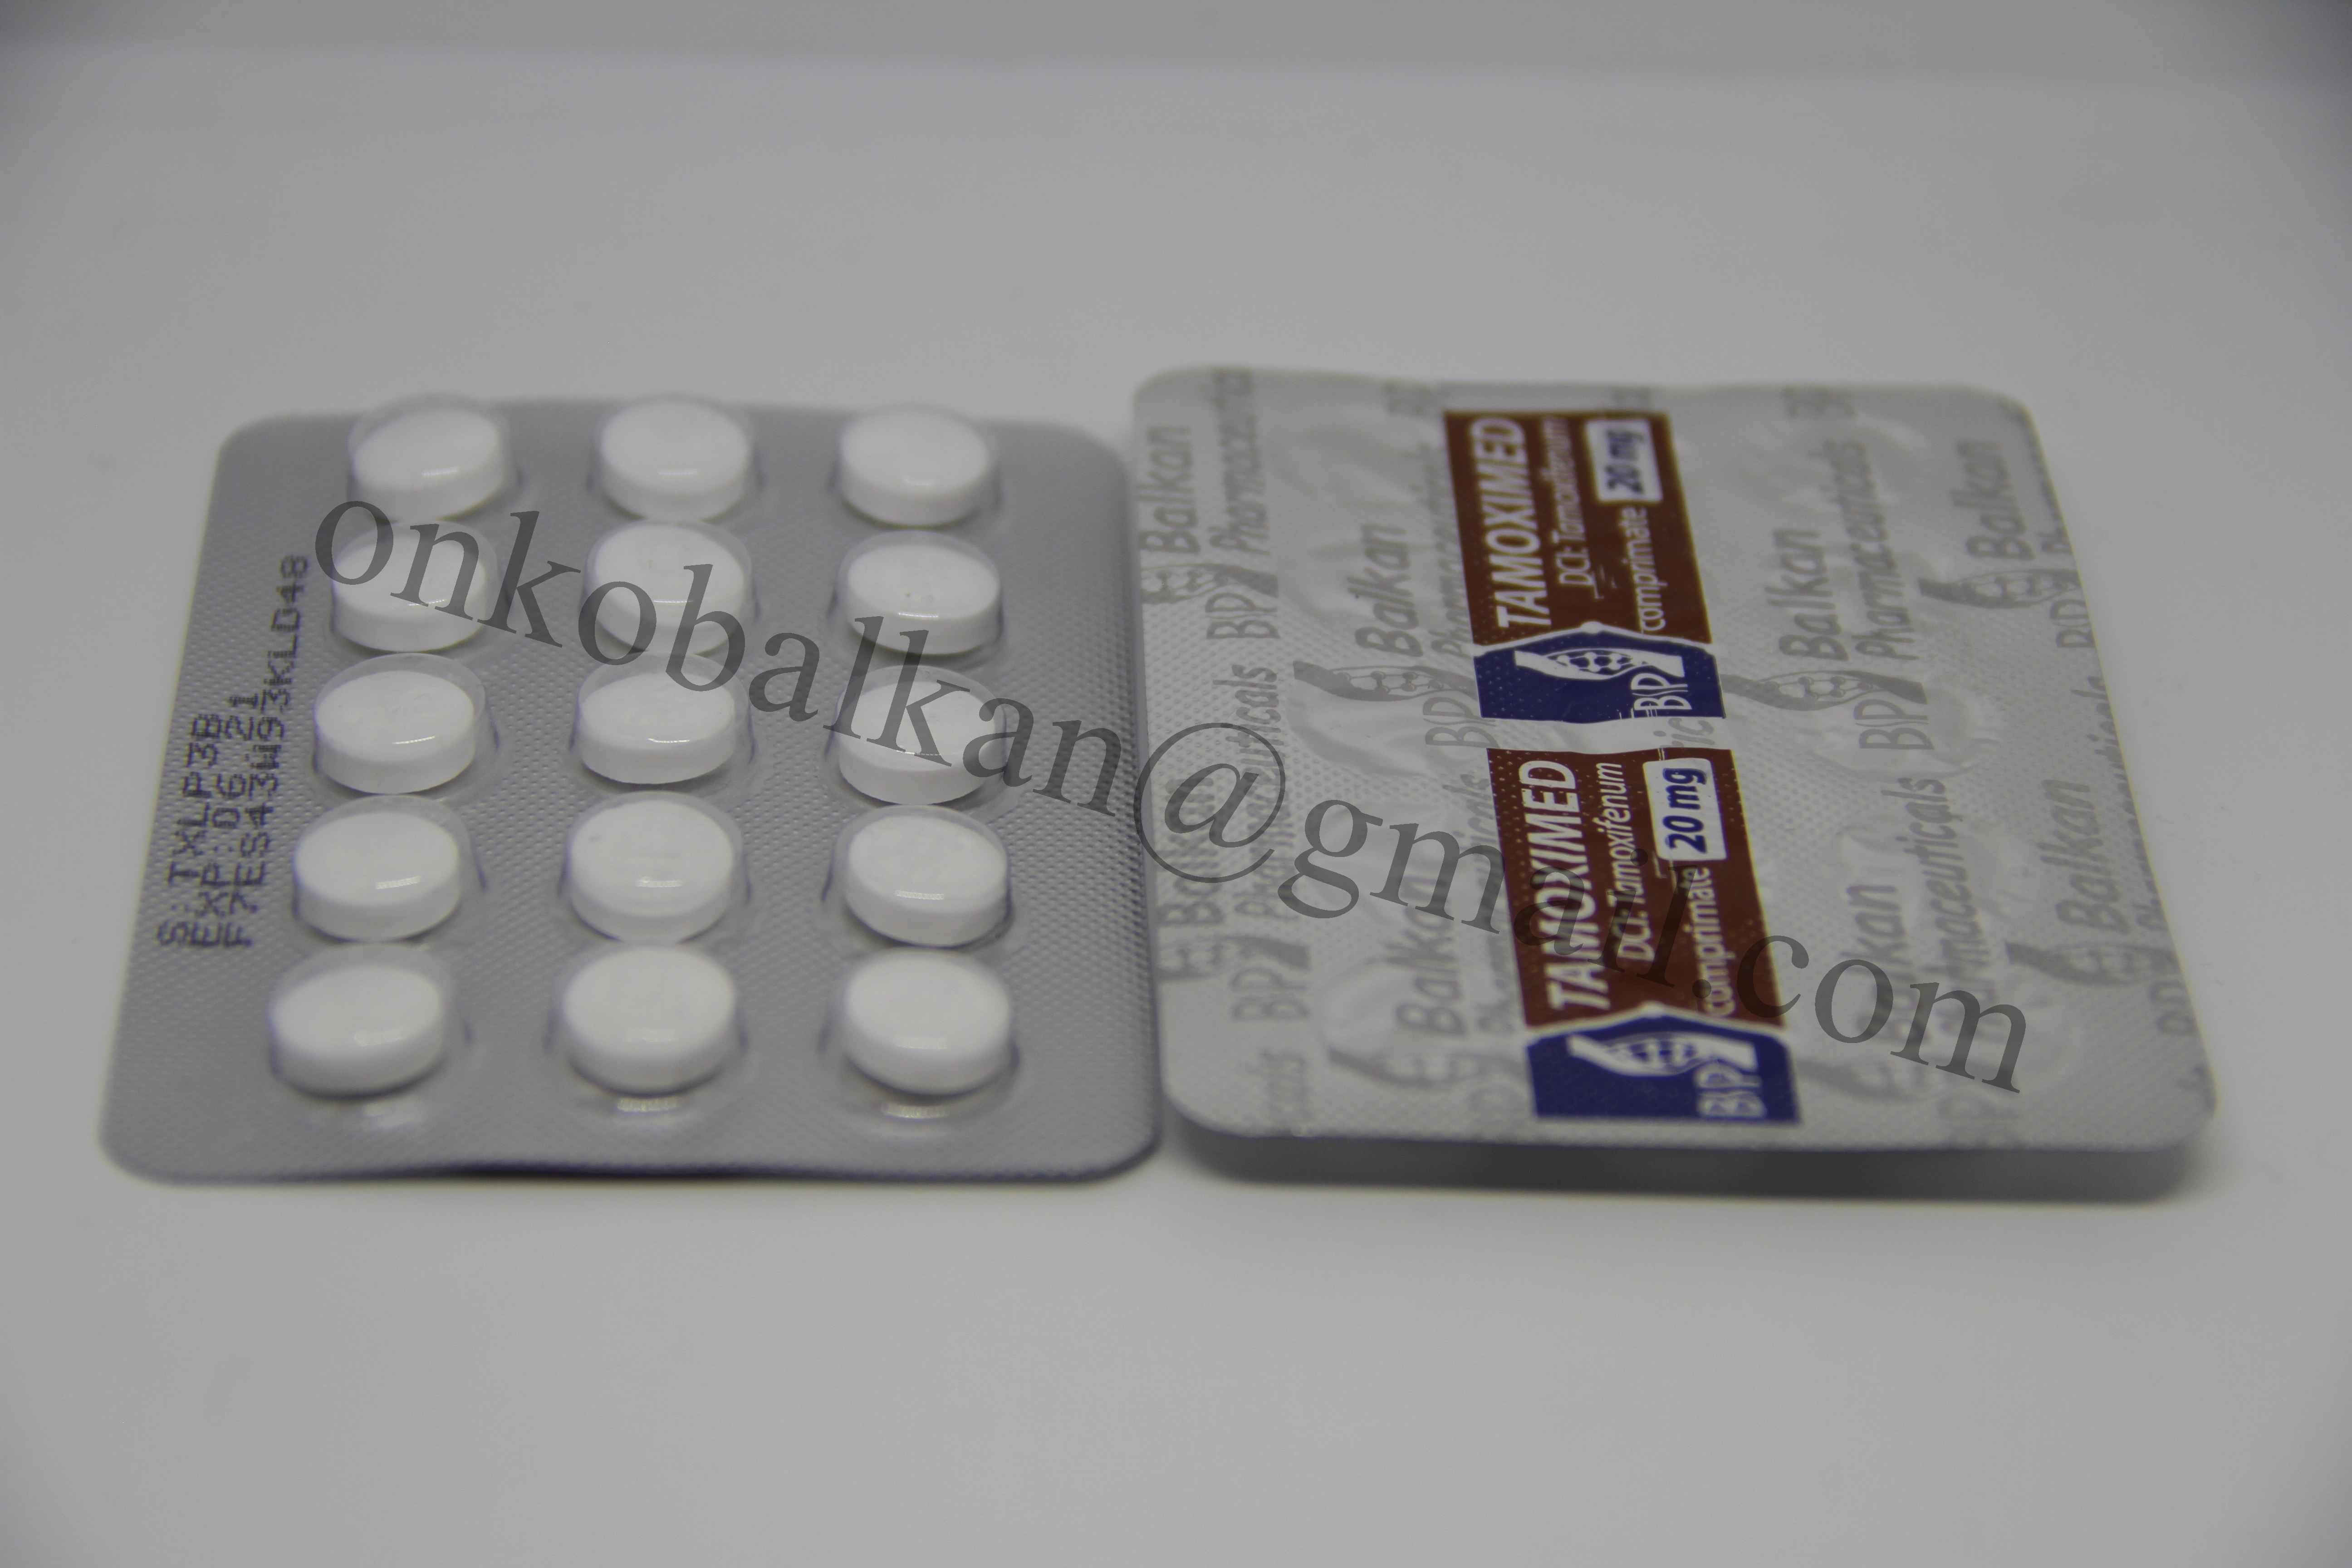 How To Make Your Product Stand Out With Boldenone Injection kaufen in Deutschland